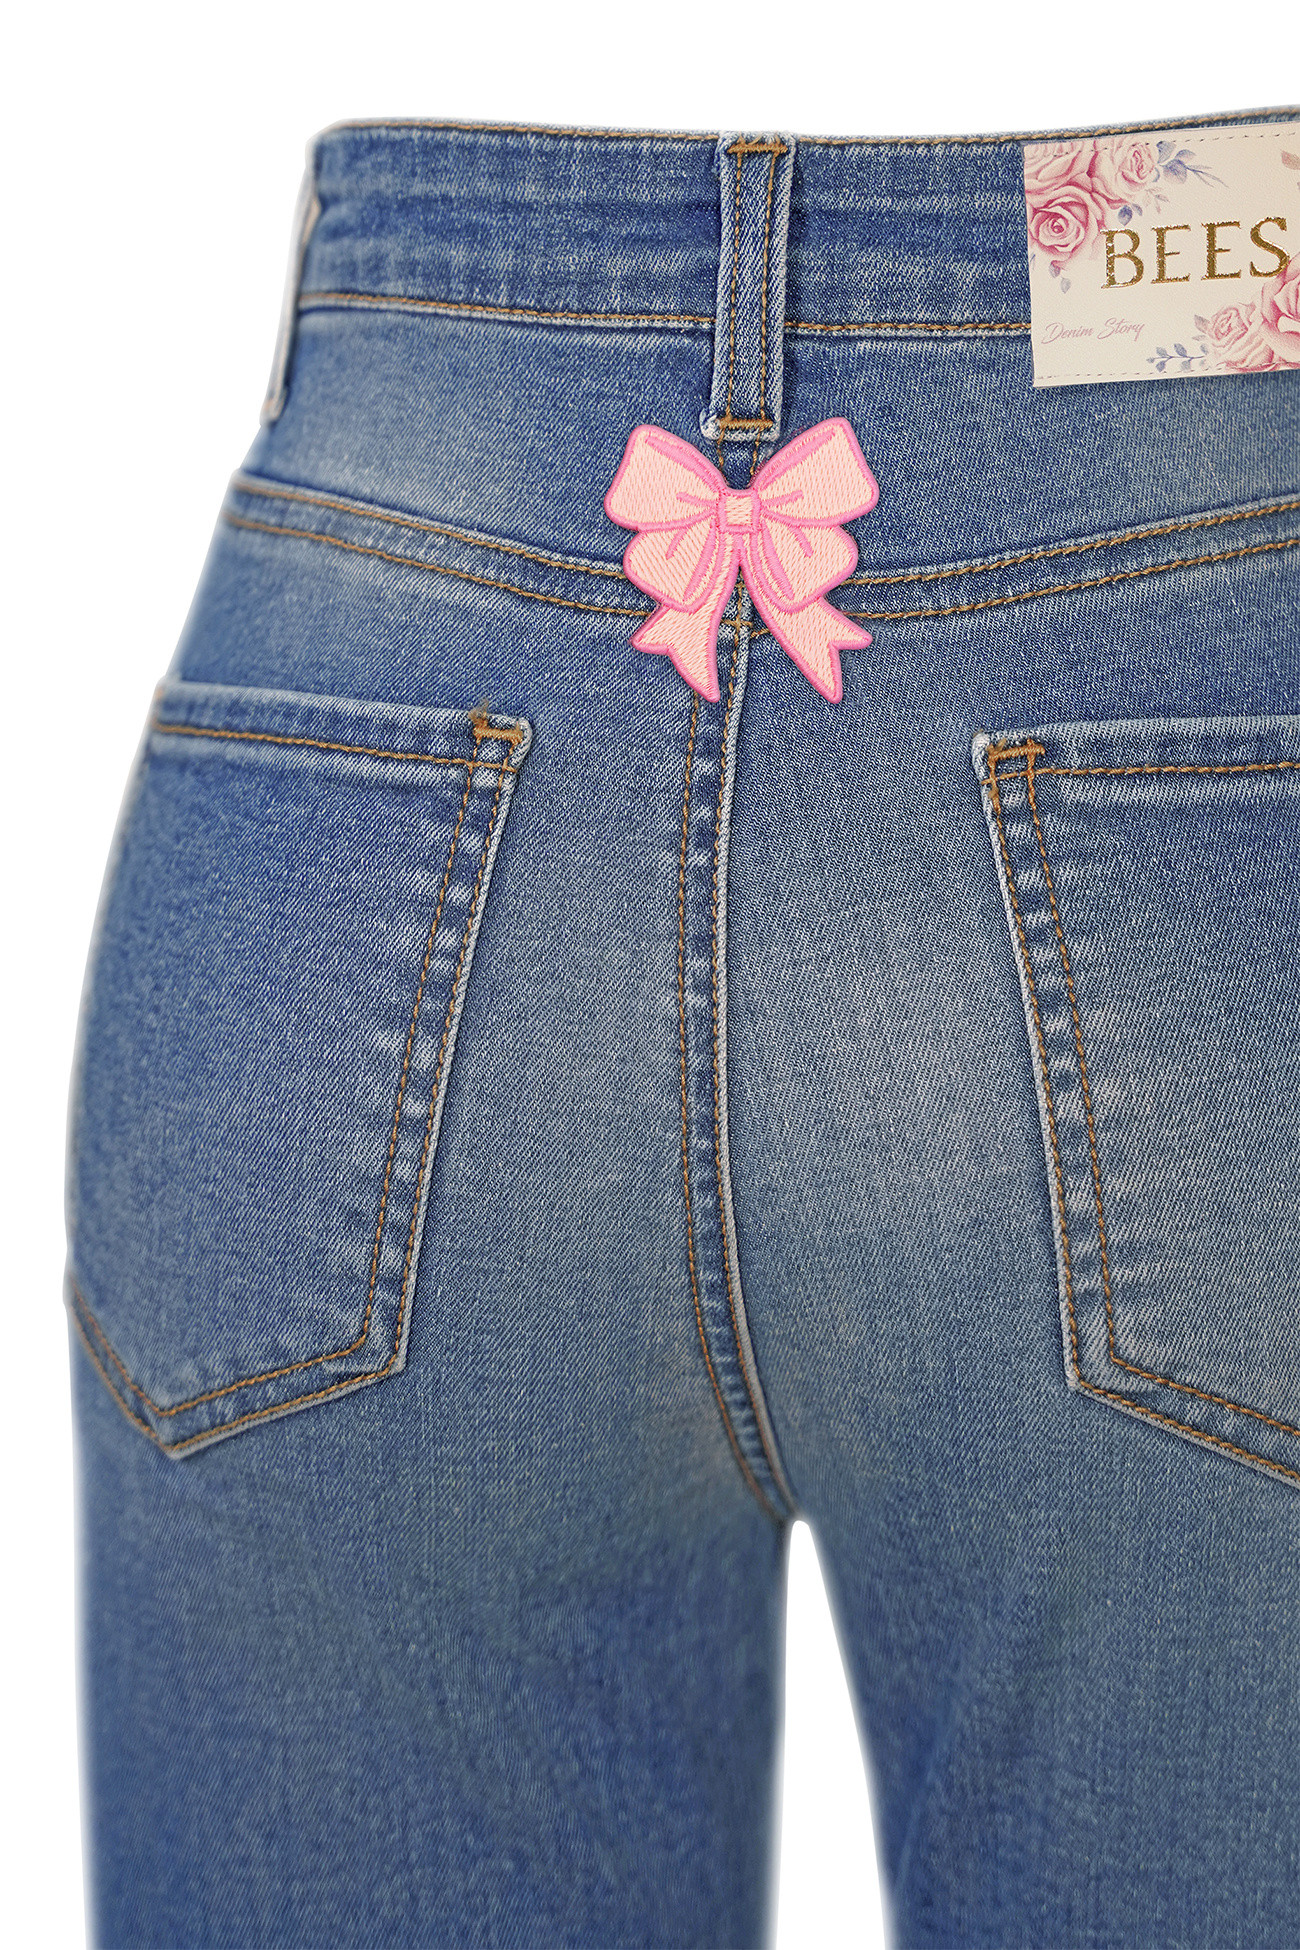 Bees - Iconic Jeans with bow, Denim, large image number 3